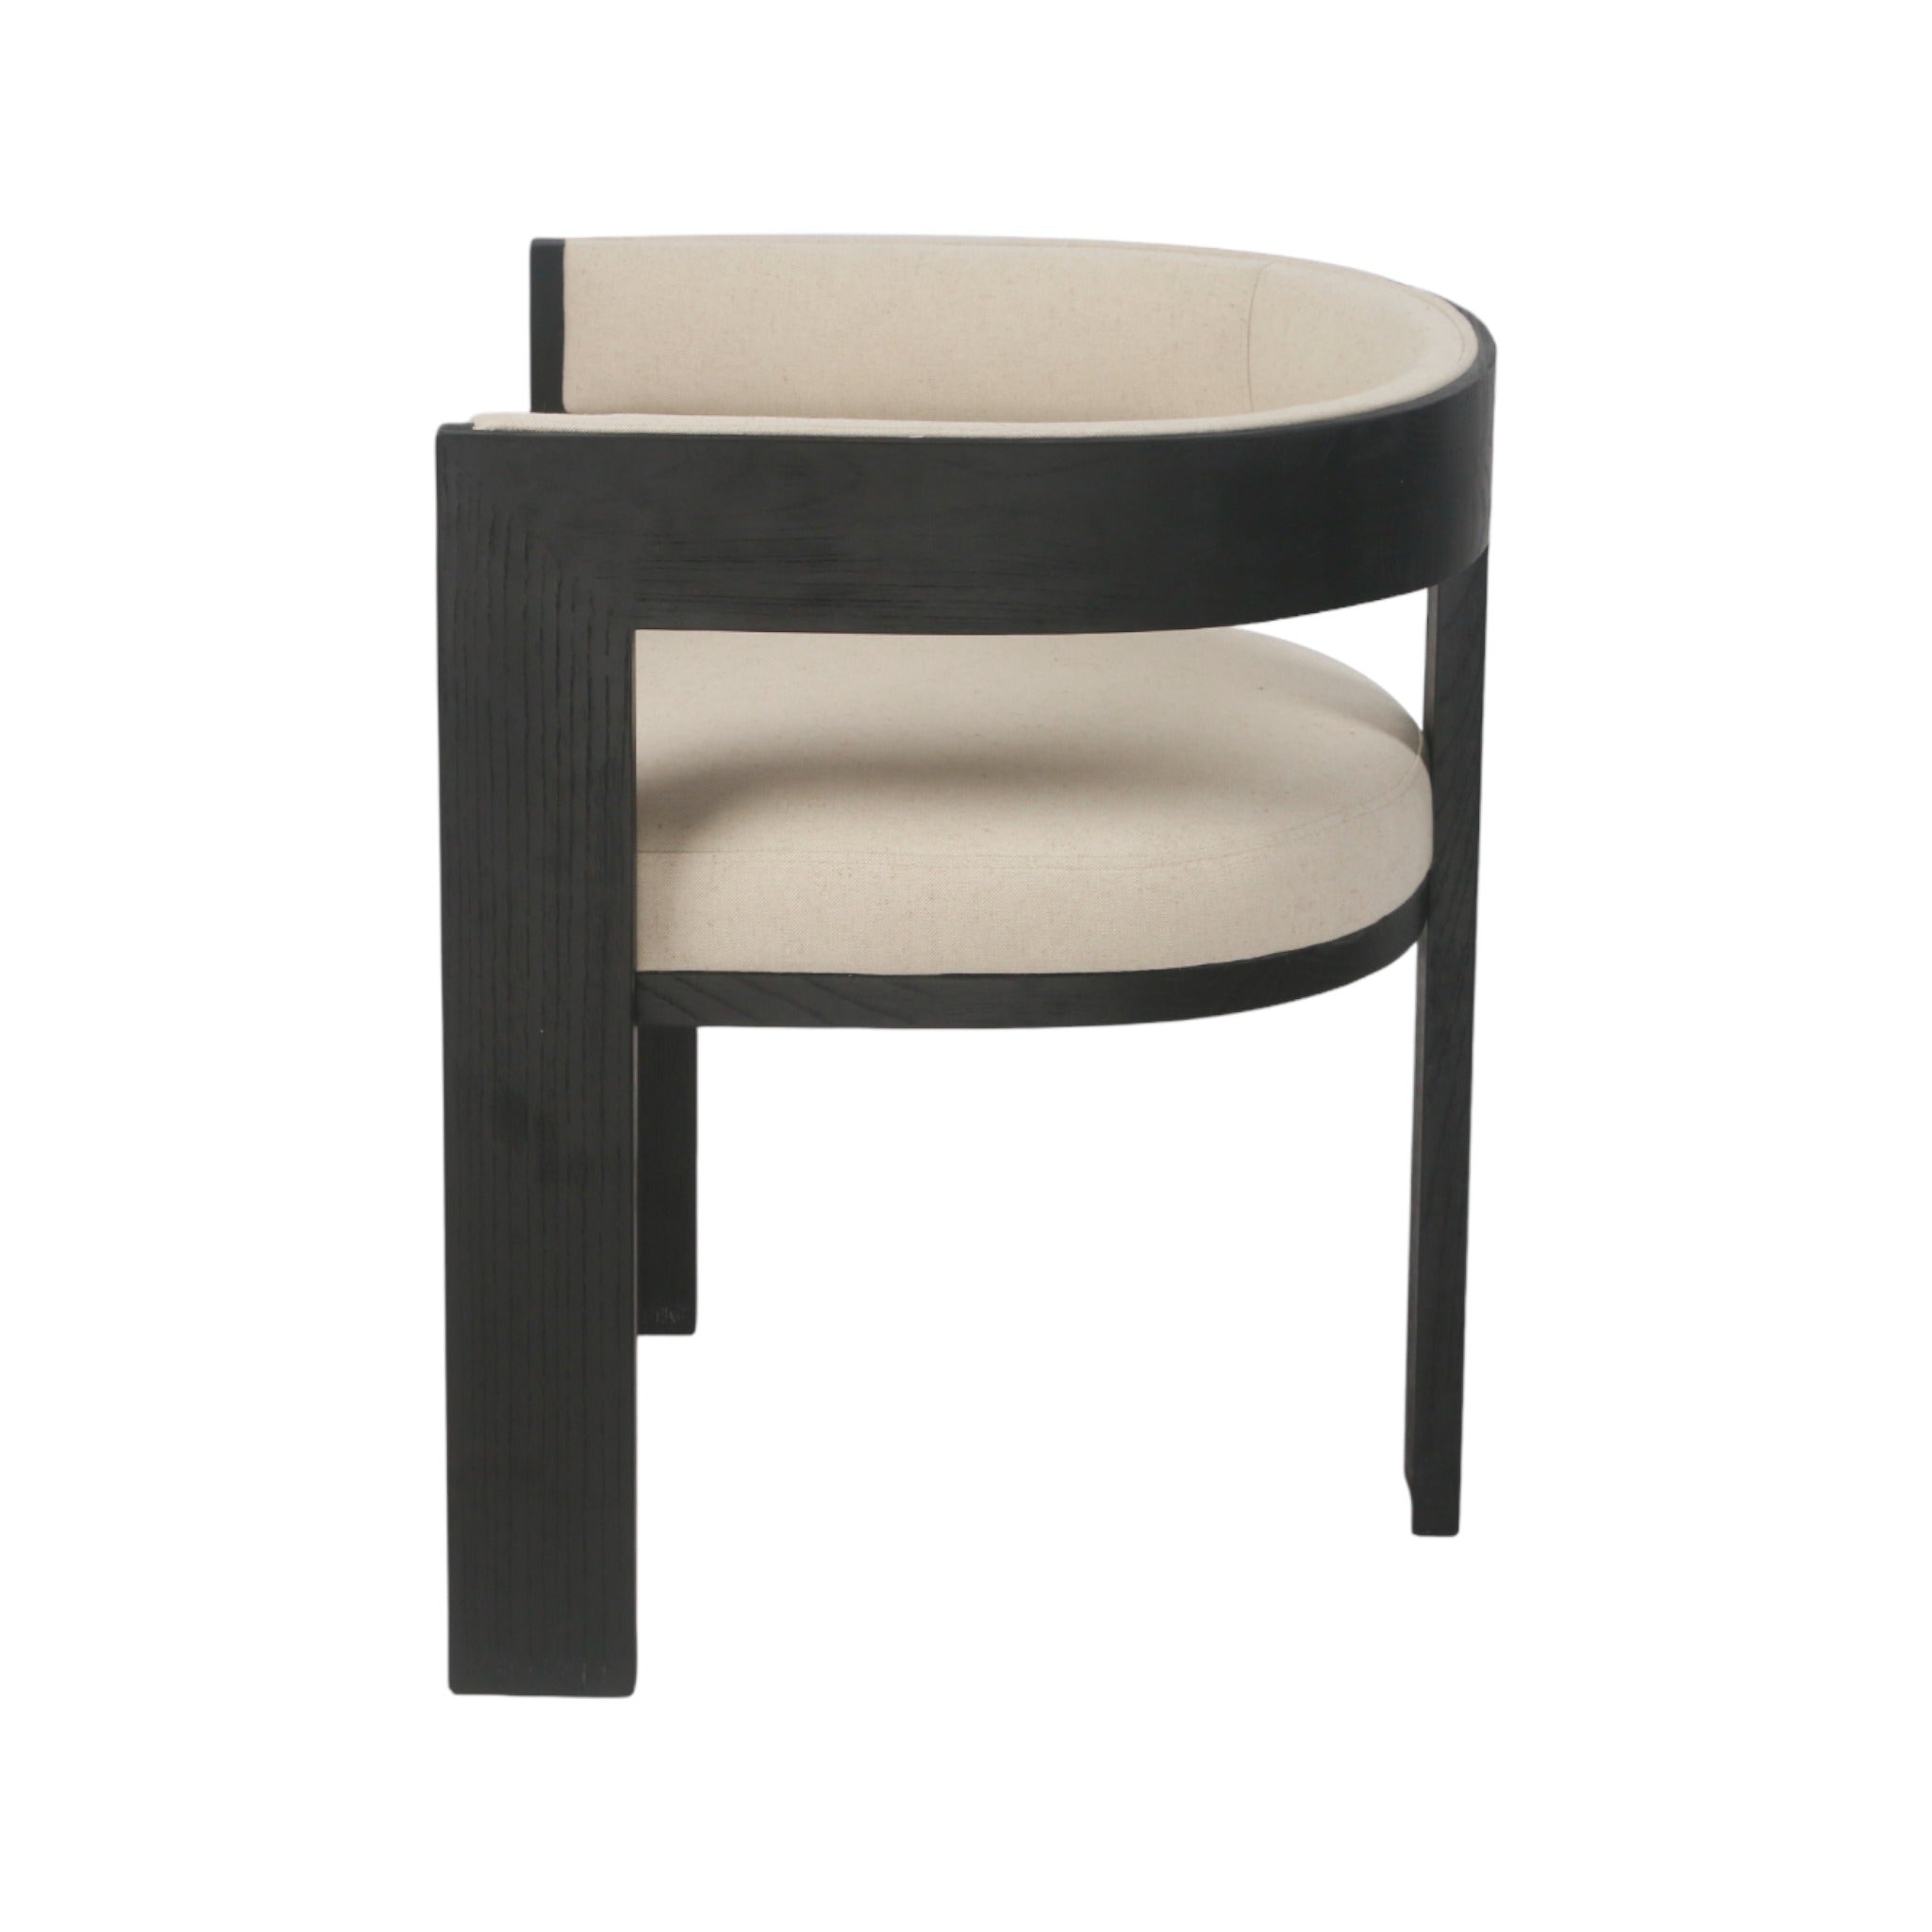 Set of 2 Elise Elm Dining Chair - Black - Dining Chairs